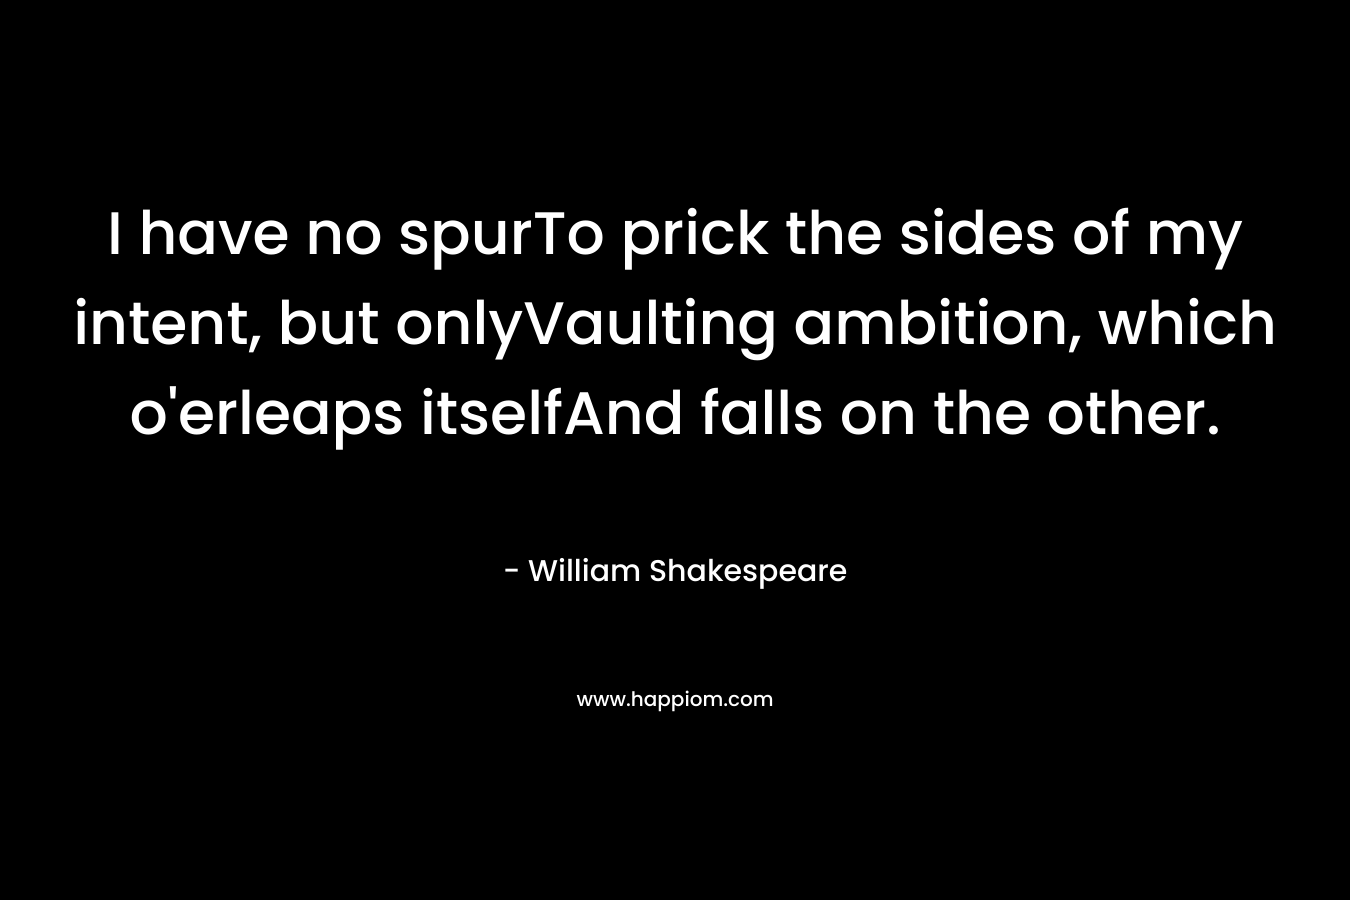 I have no spurTo prick the sides of my intent, but onlyVaulting ambition, which o’erleaps itselfAnd falls on the other. – William Shakespeare